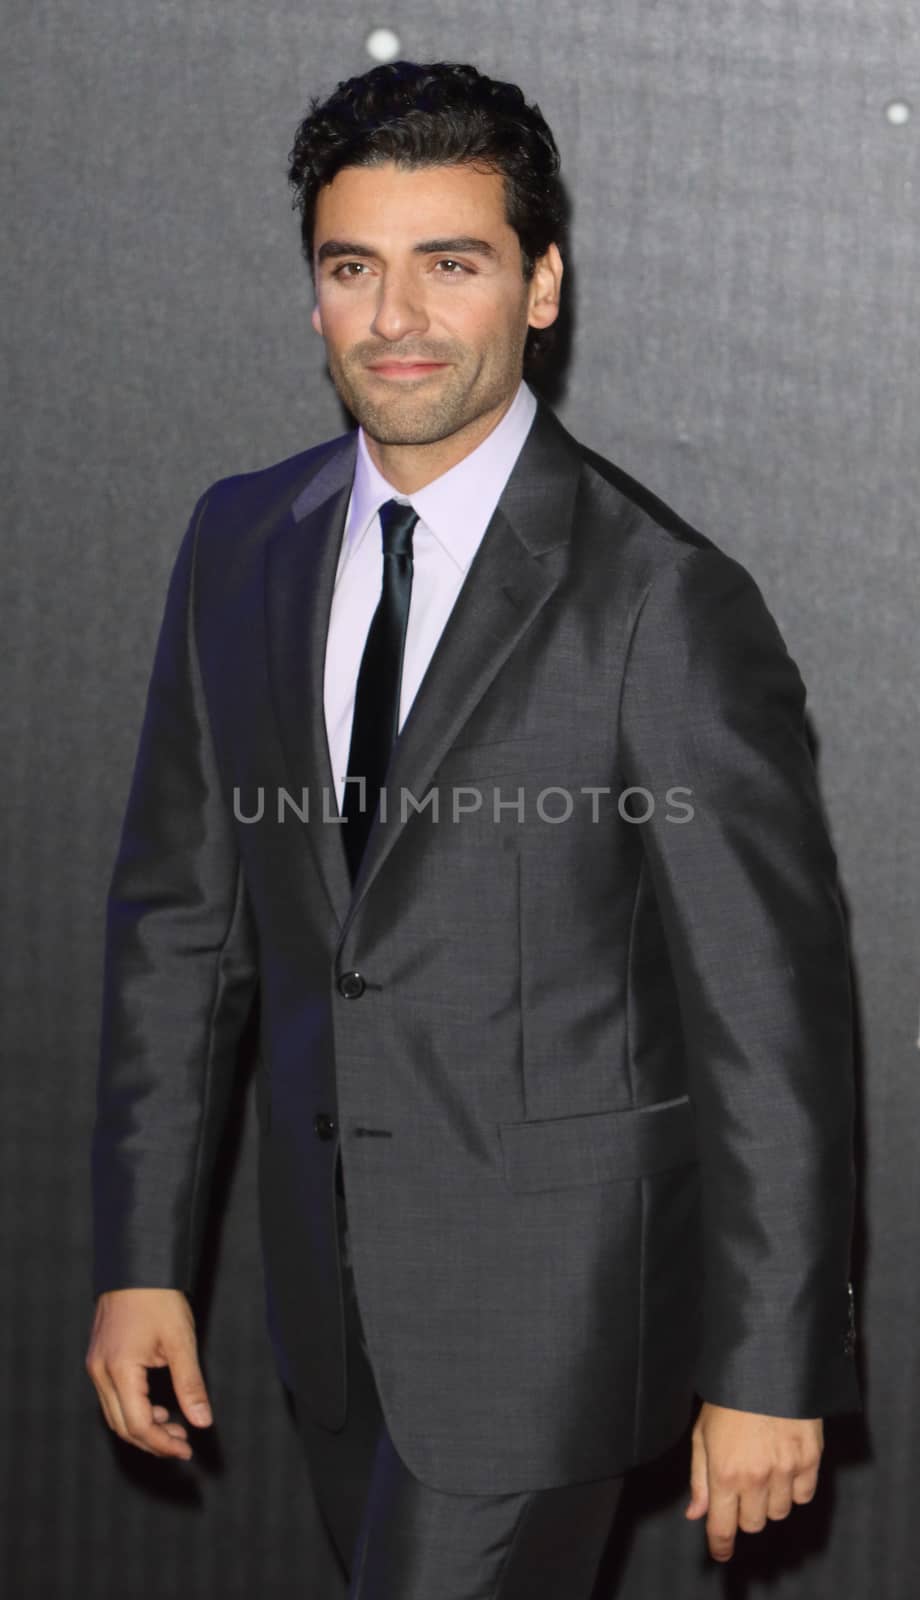 UNITED-KINGDOM, London : The Guatemalan actor plays newcomer Poe Dameron in last episode of Star Wars Oscar Isaac poses for photographers while Star Wars cast, crew and celebrities hit the red carpet for the last episode The Force Awakens European Premiere on December 16, 2015 in central London.   	